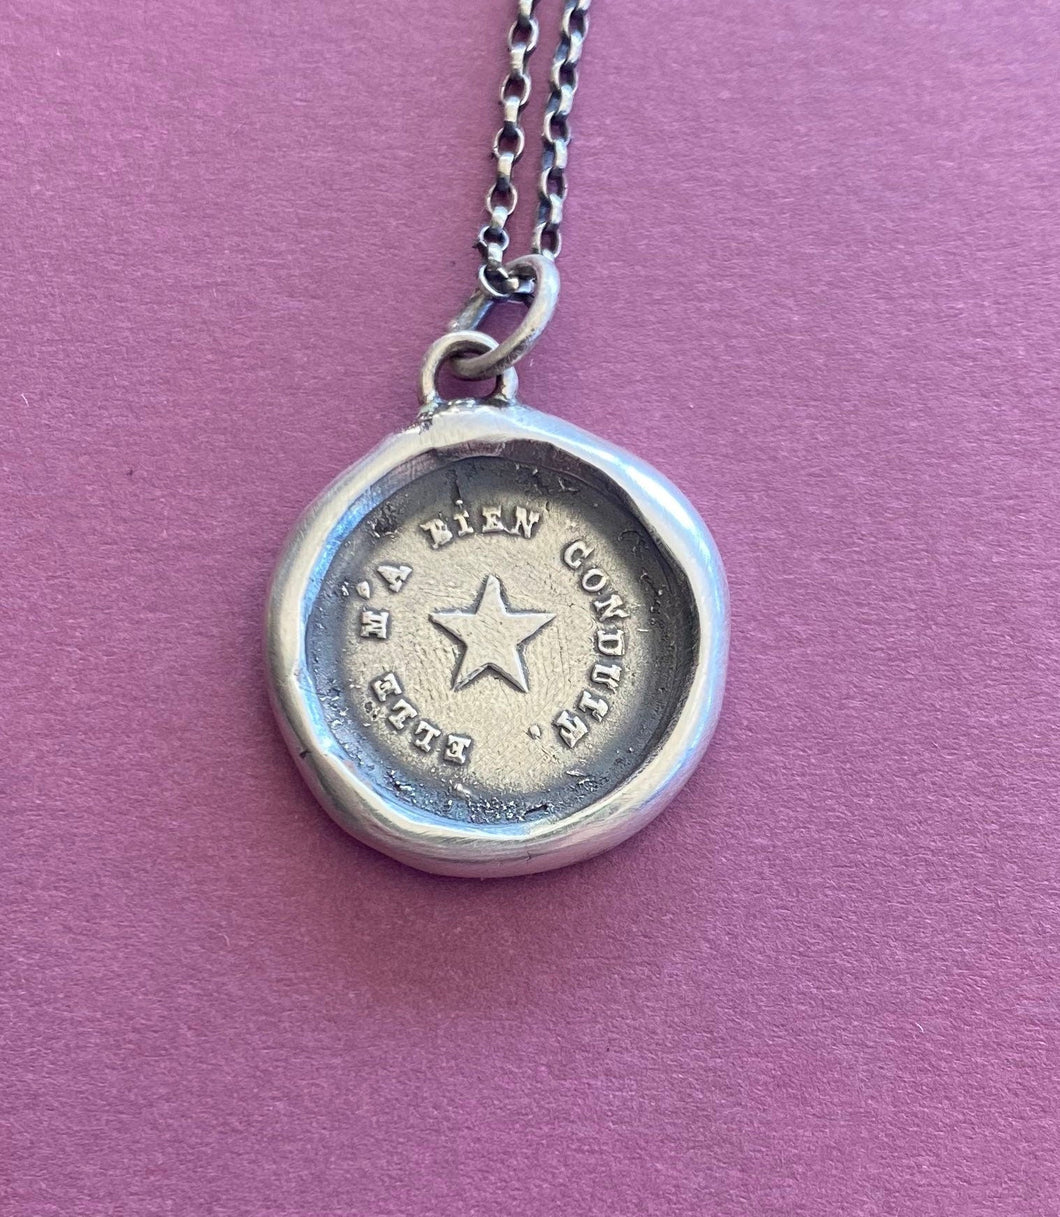 North Star necklace.  antique wax letter seal,  Elle m'a bien conduite. She guides me well. North Star, Polaris.